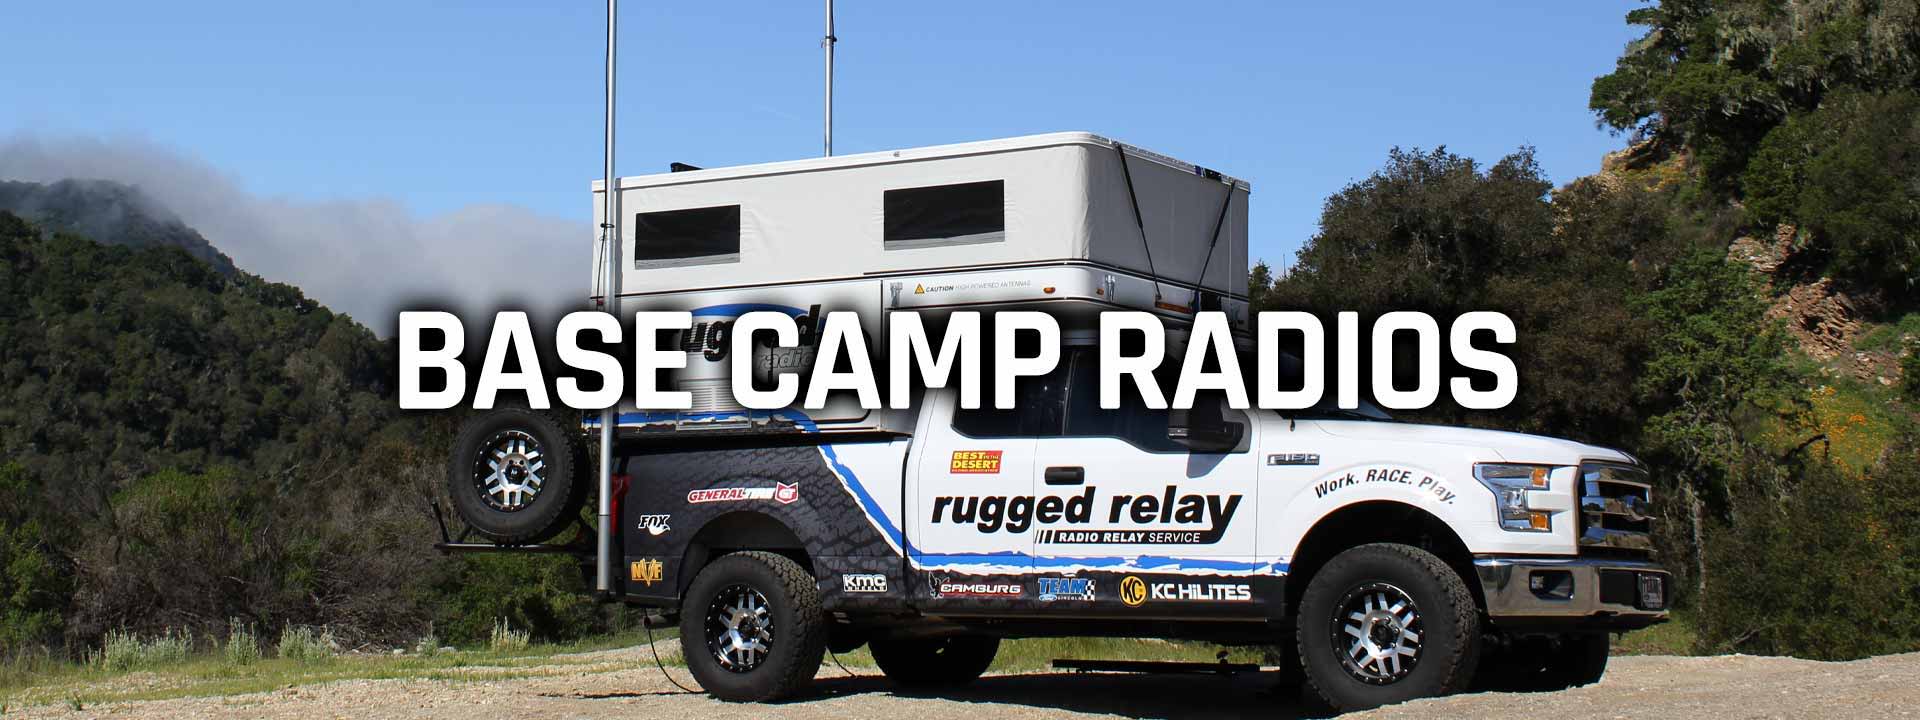 base camp and pit support radios and telescoping antennas